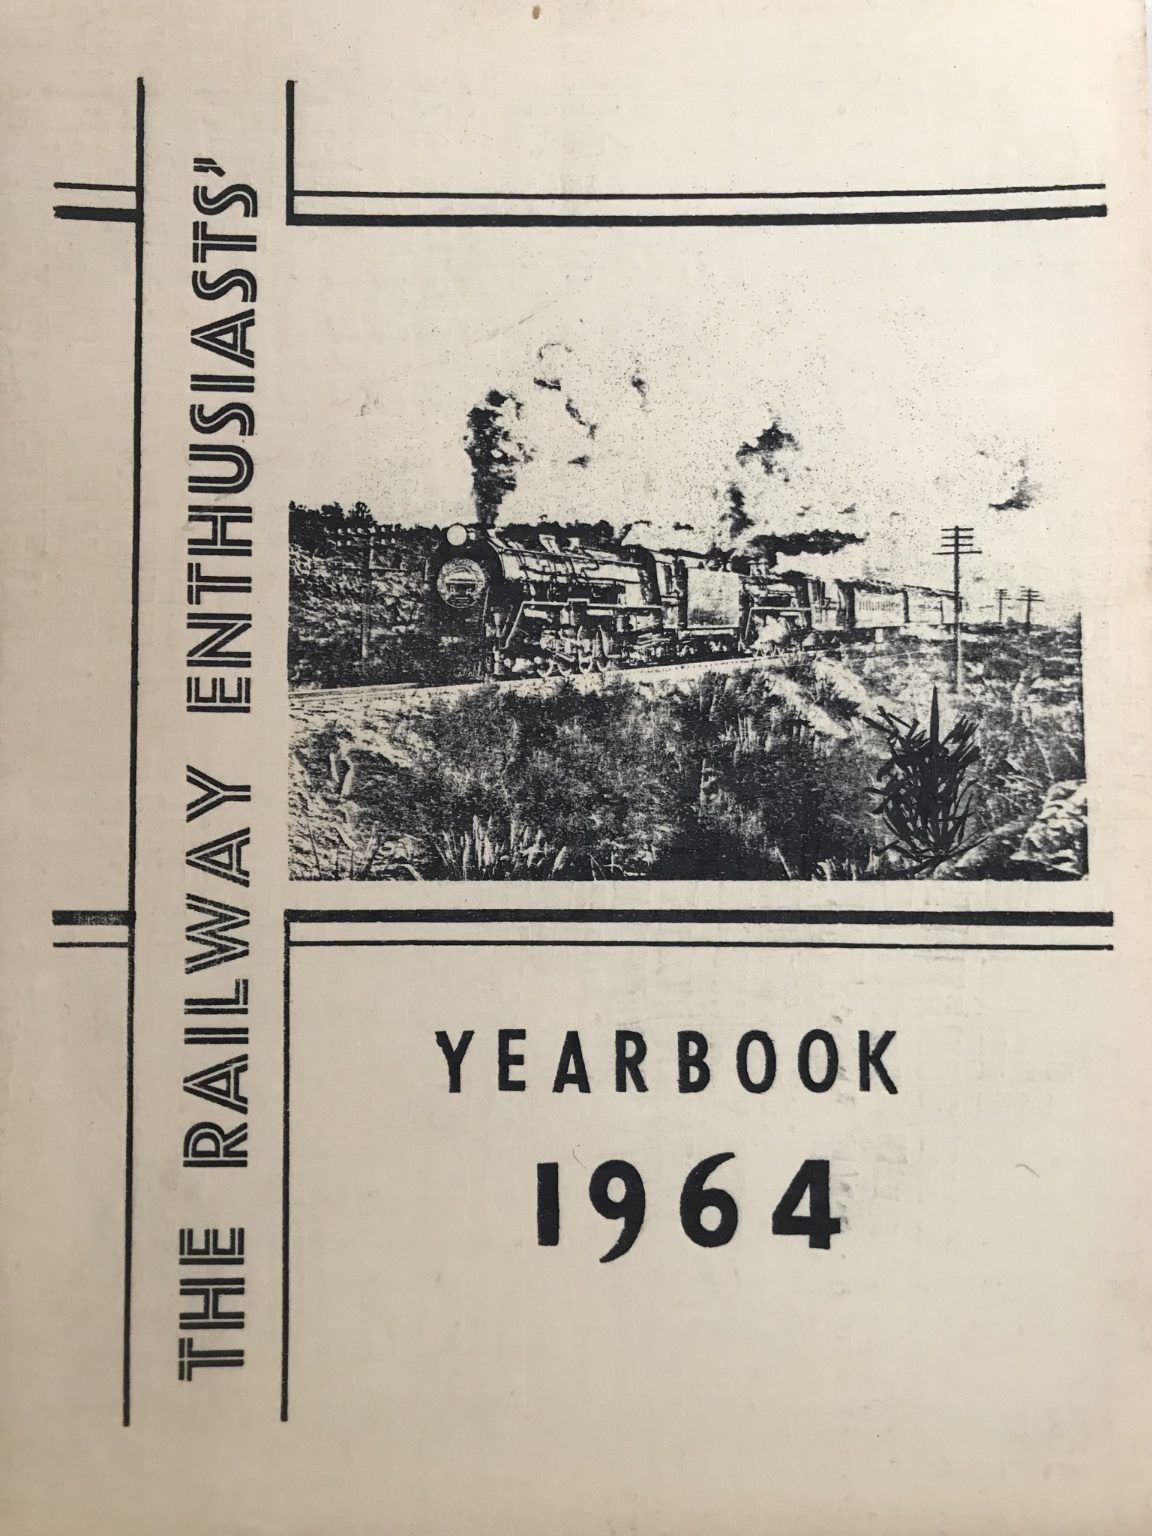 THE RAILWAY ENTHUSIASTS' YEARBOOK 1964